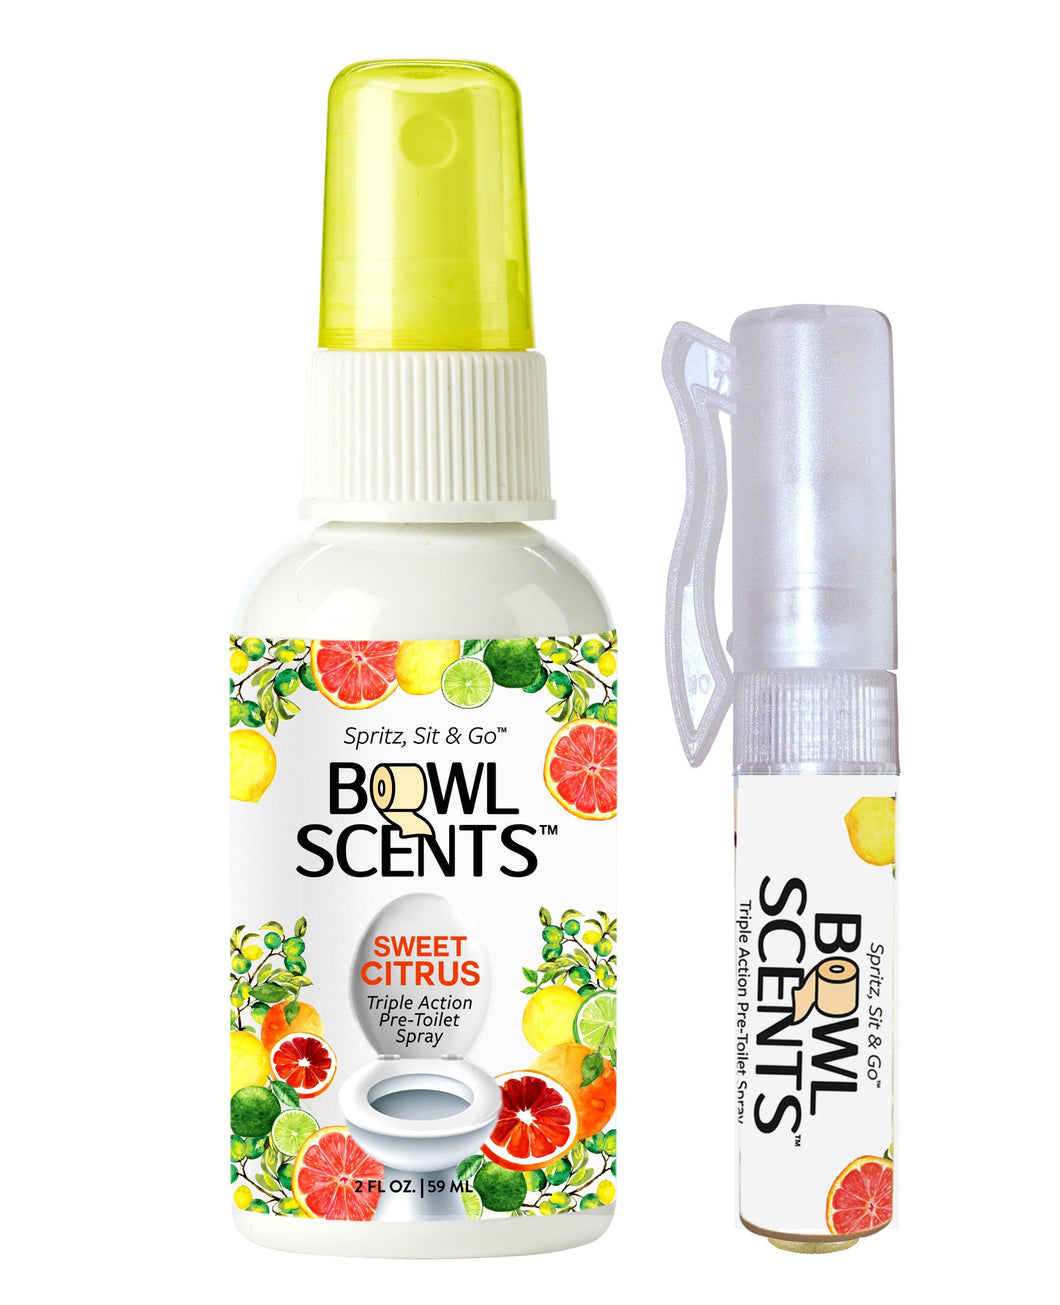 Bowl Scents 2 oz mini with Traveler plus No Contact Brass tool base, antimicrobial brass no touch to avoid surfaces